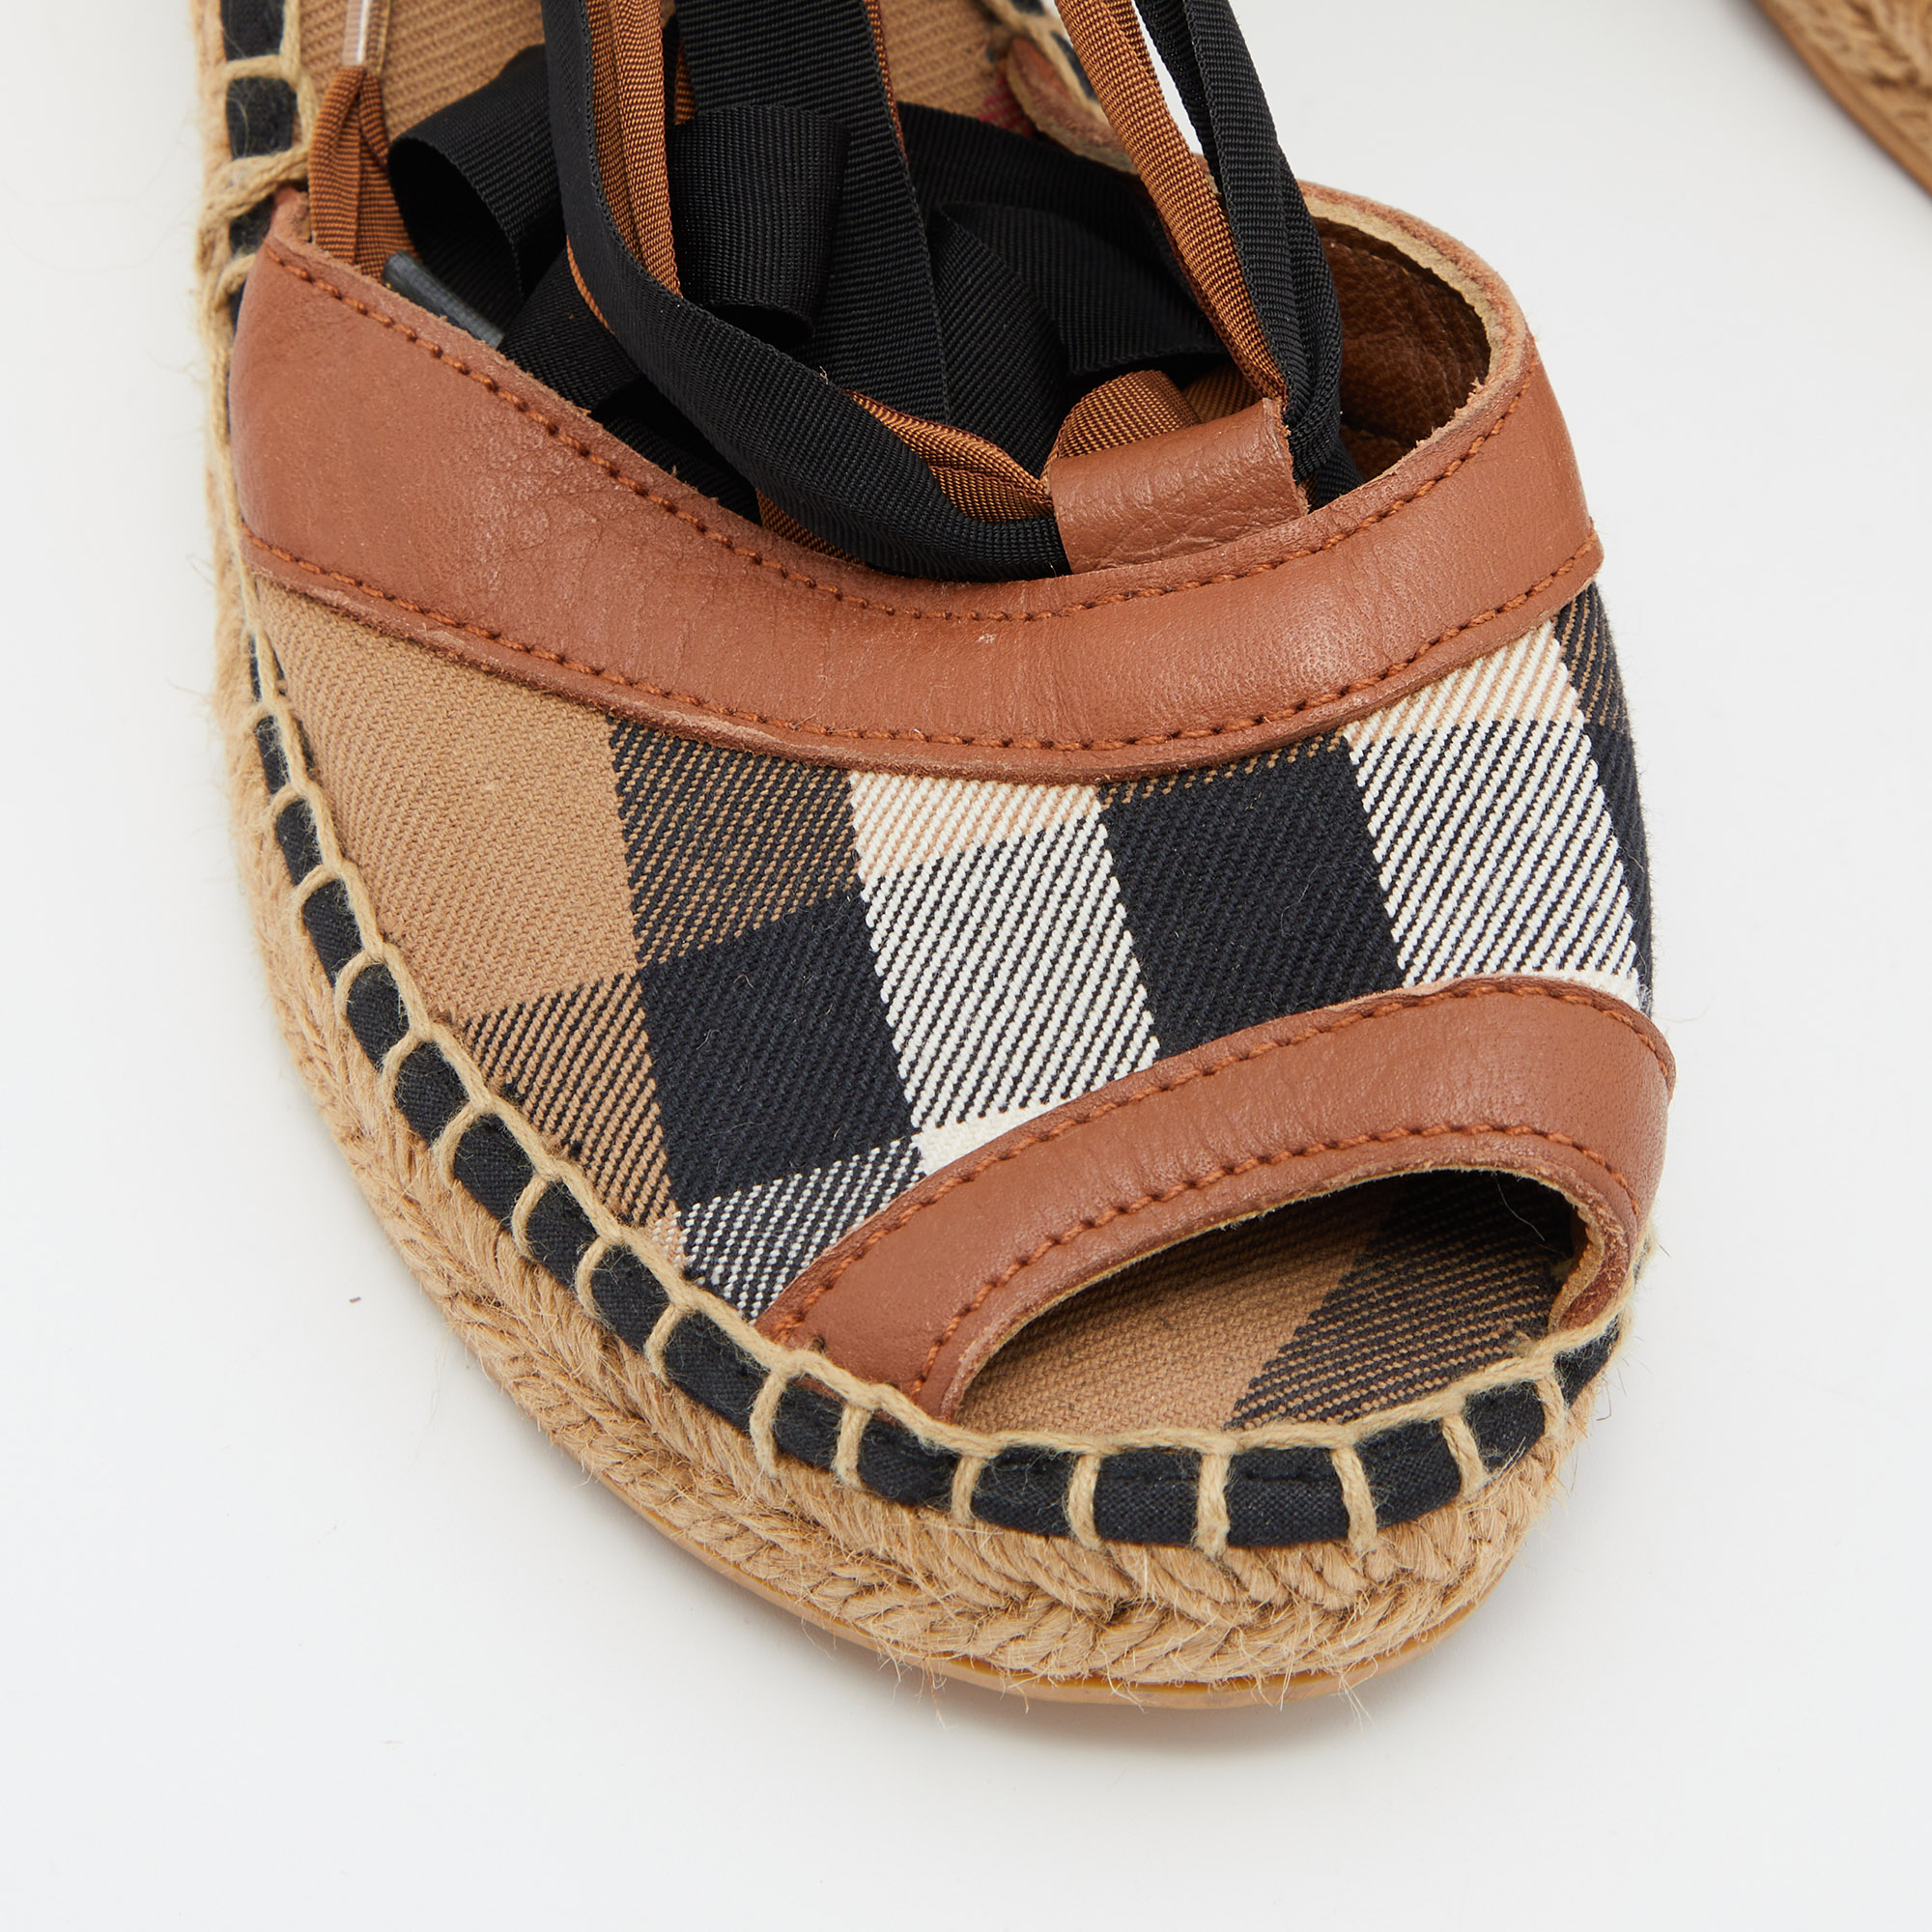 Burberry Brown House Check Canvas And Leather Strappy Espadrille Wedge Sandals Size 39